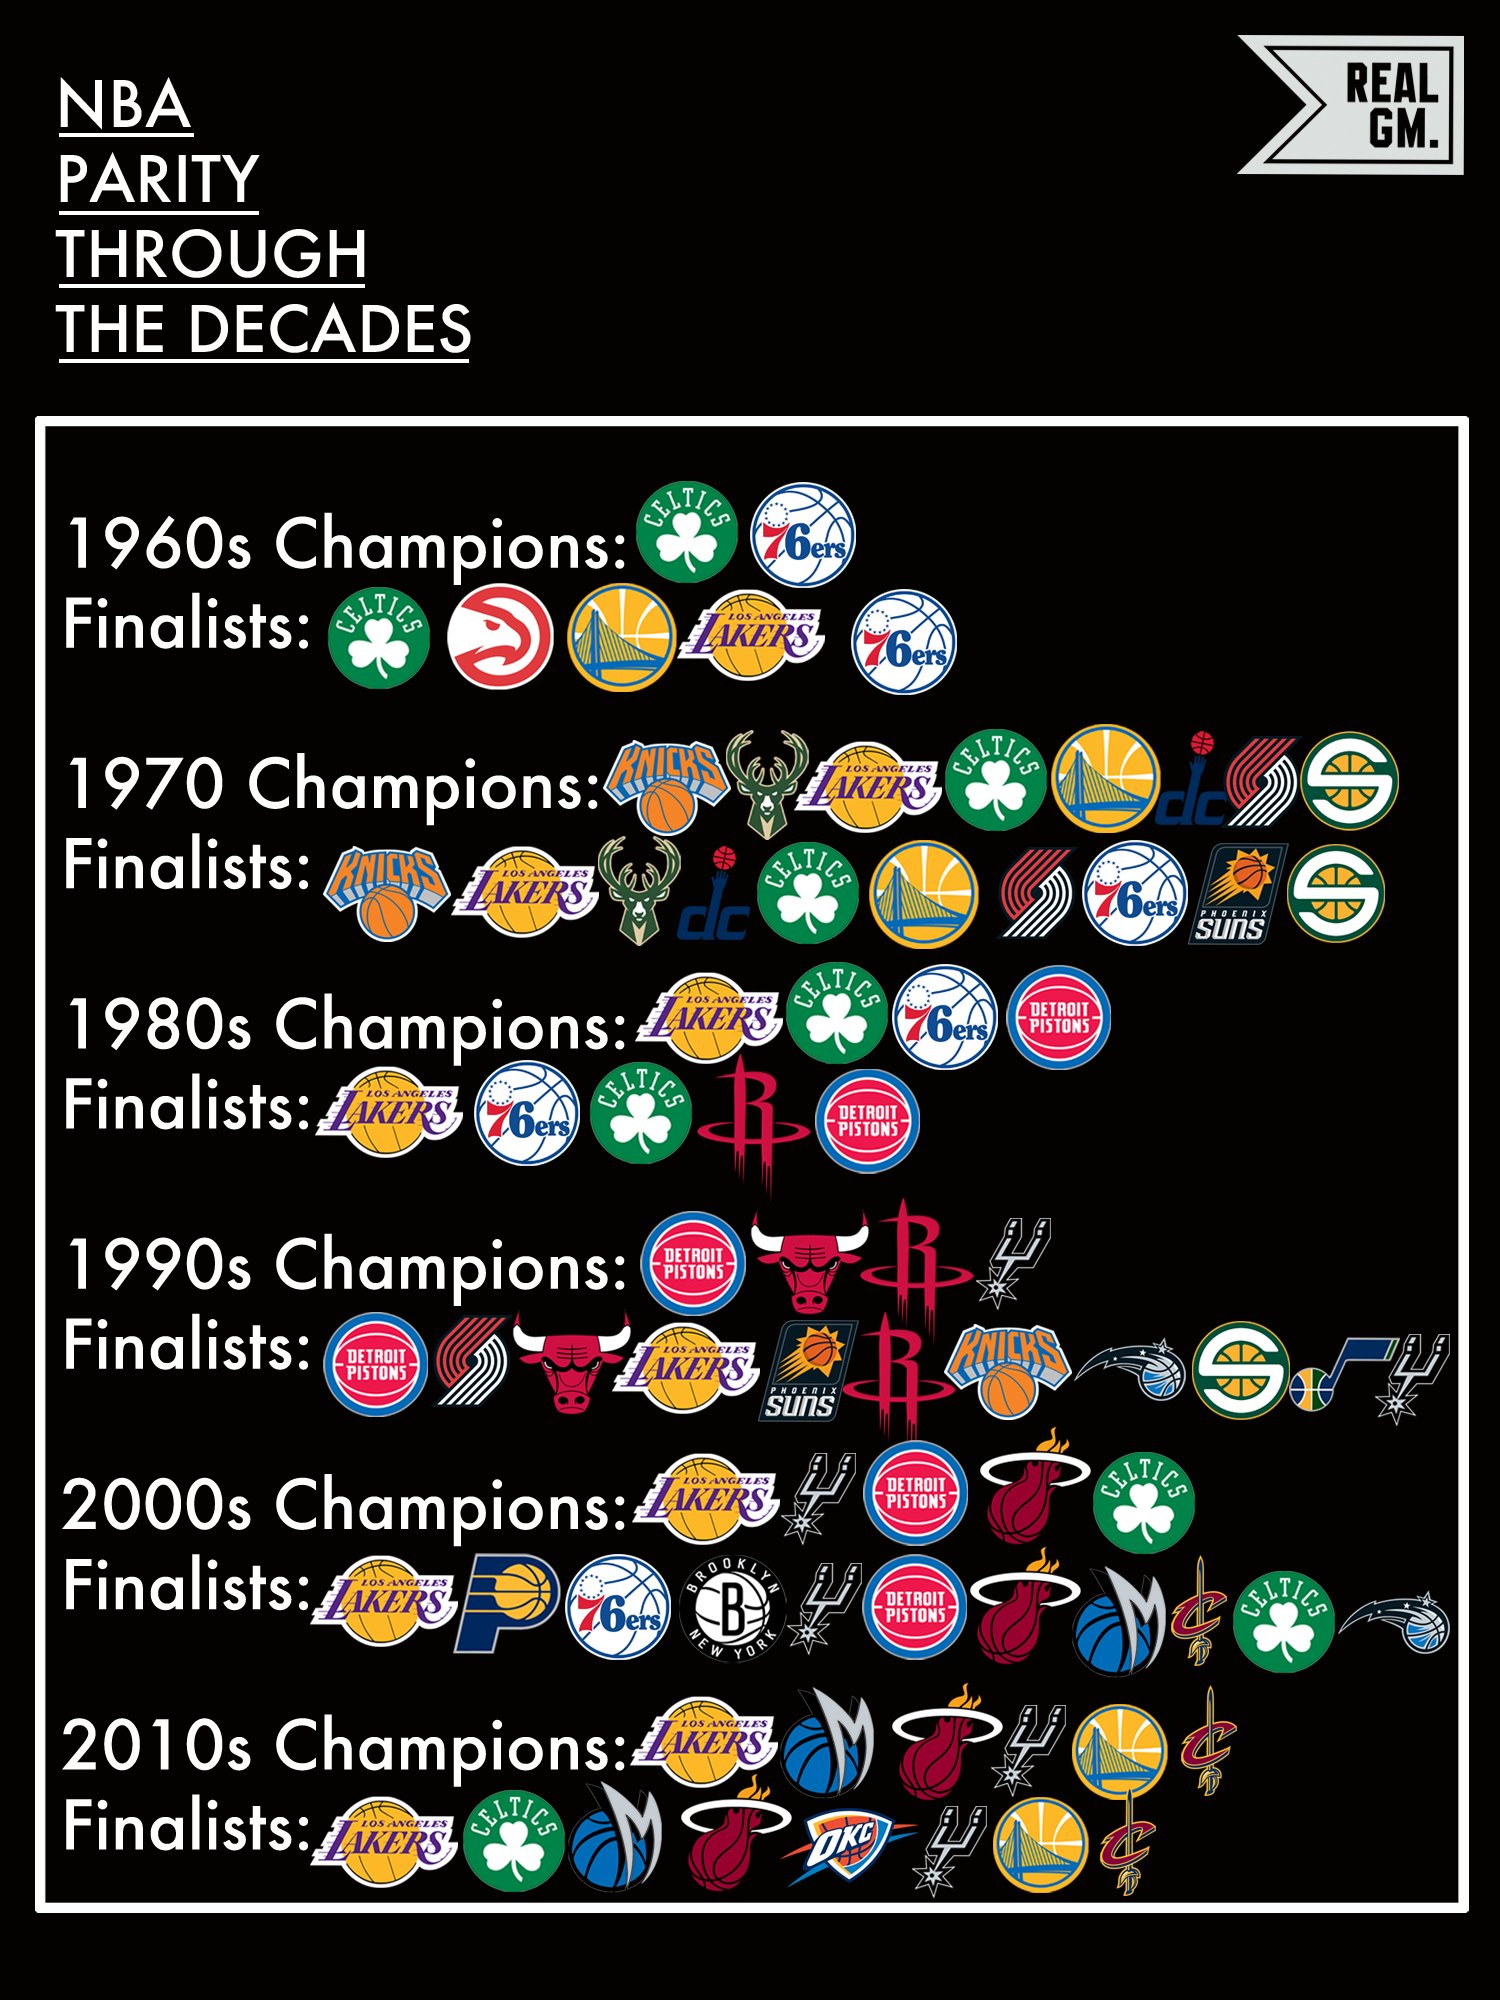 RealGM on Twitter: "NBA Finals Parity Through The Decades https://t.co